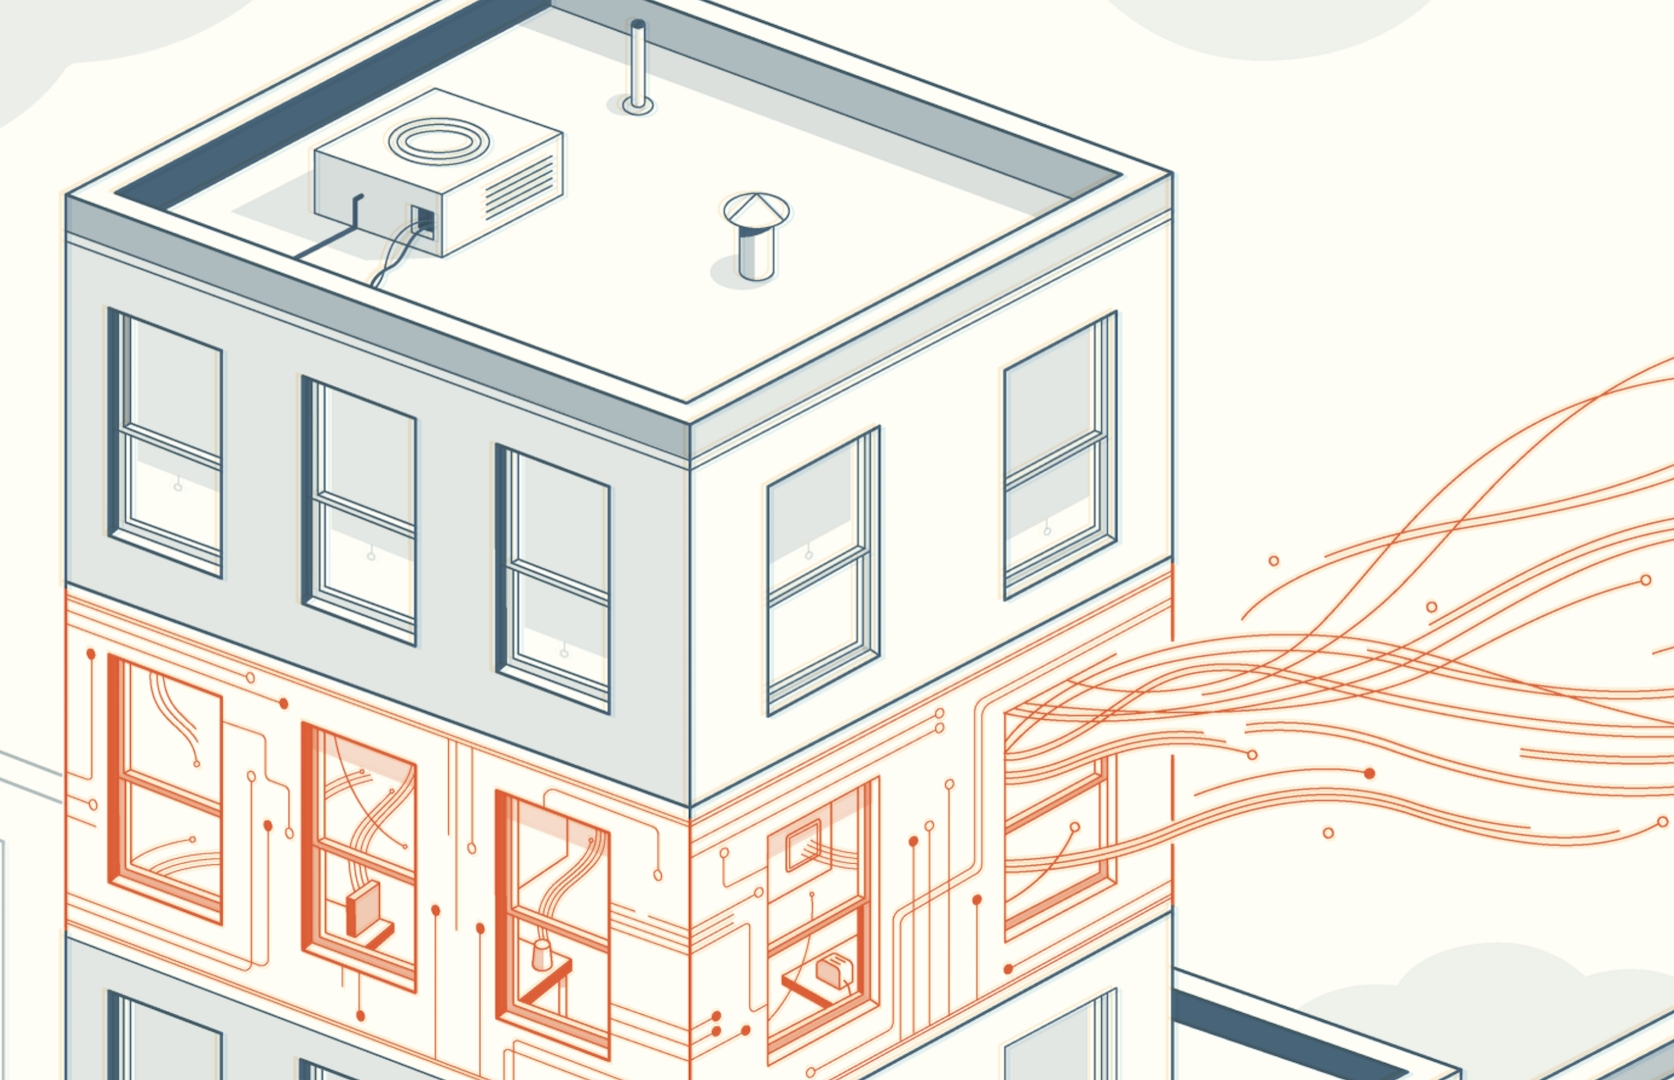 House That Spied; Illustration: Harry Campbell for Gizmodo/GMG